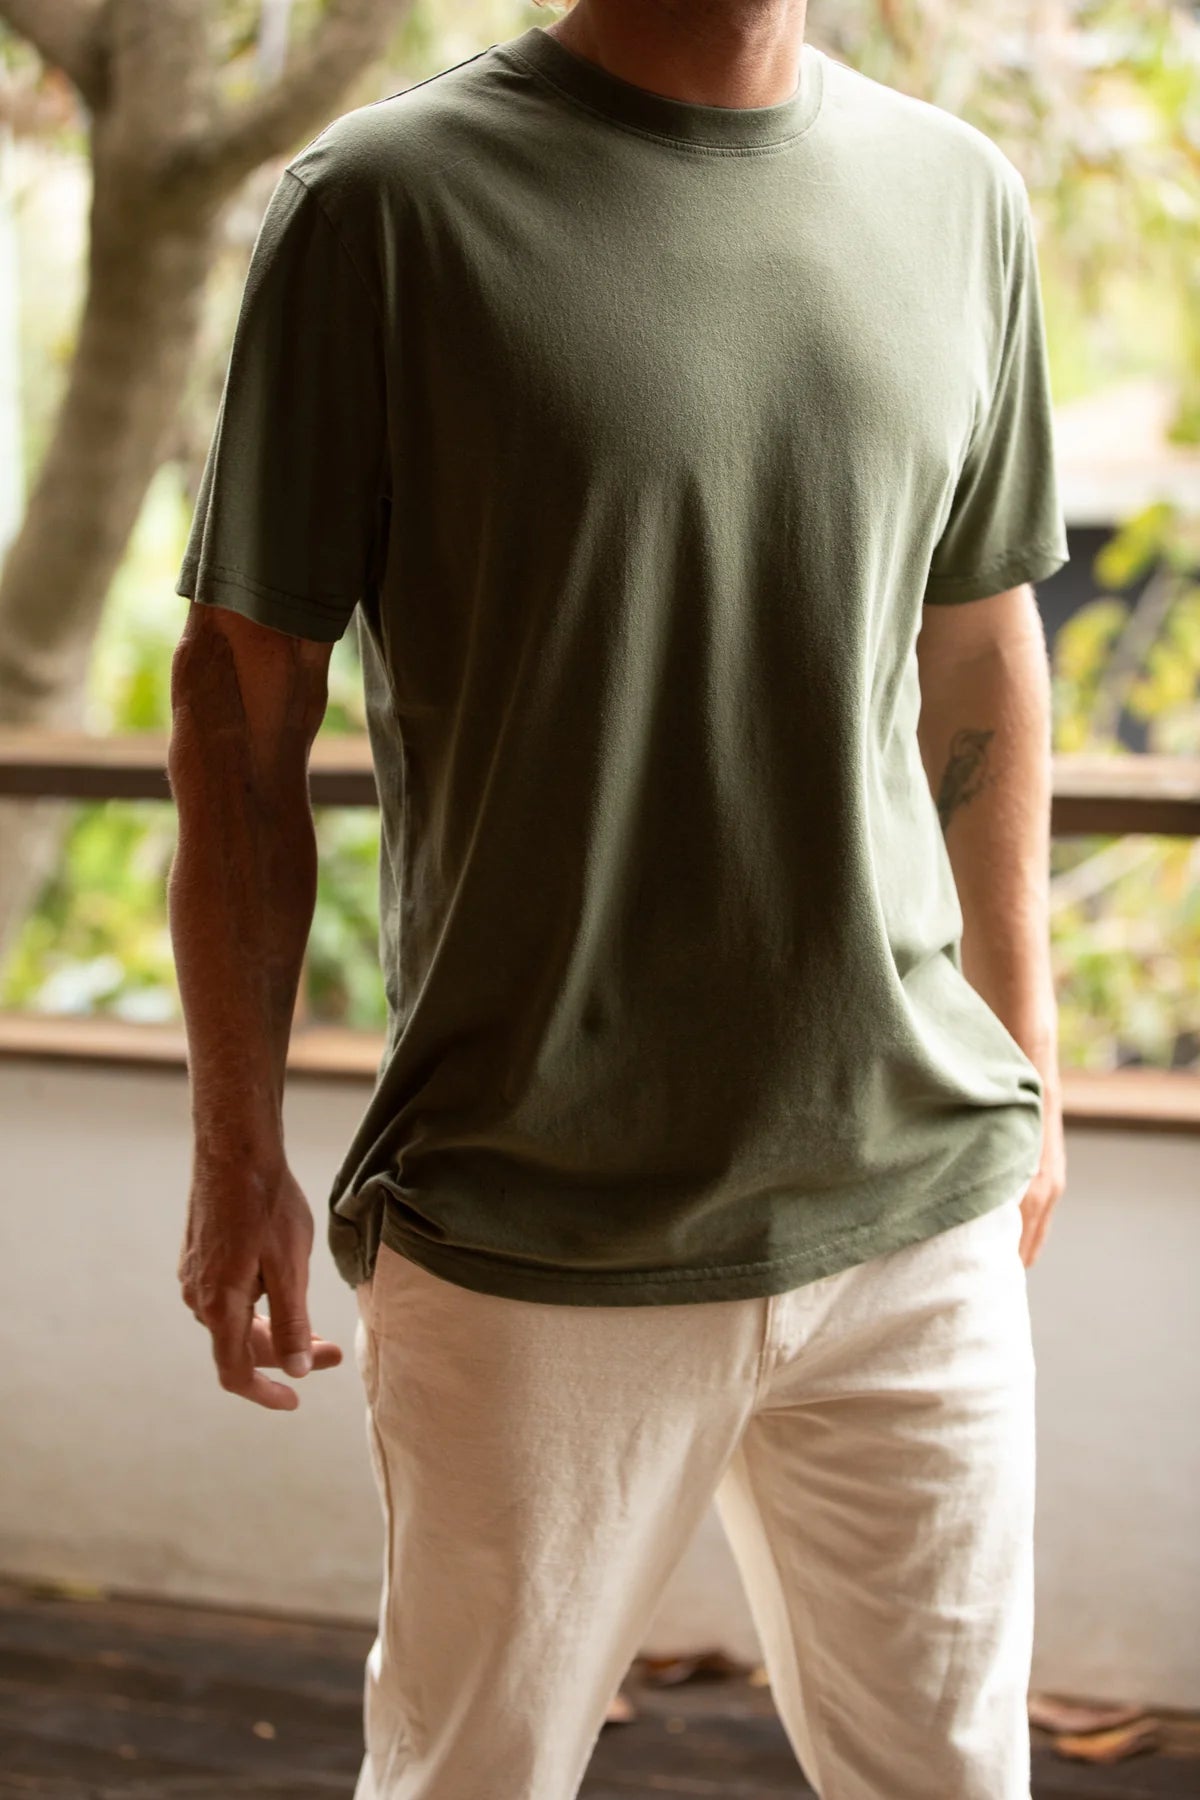 Man wearing the Classic Vintage Short Sleeve Tee in color olive green from Rhythm .